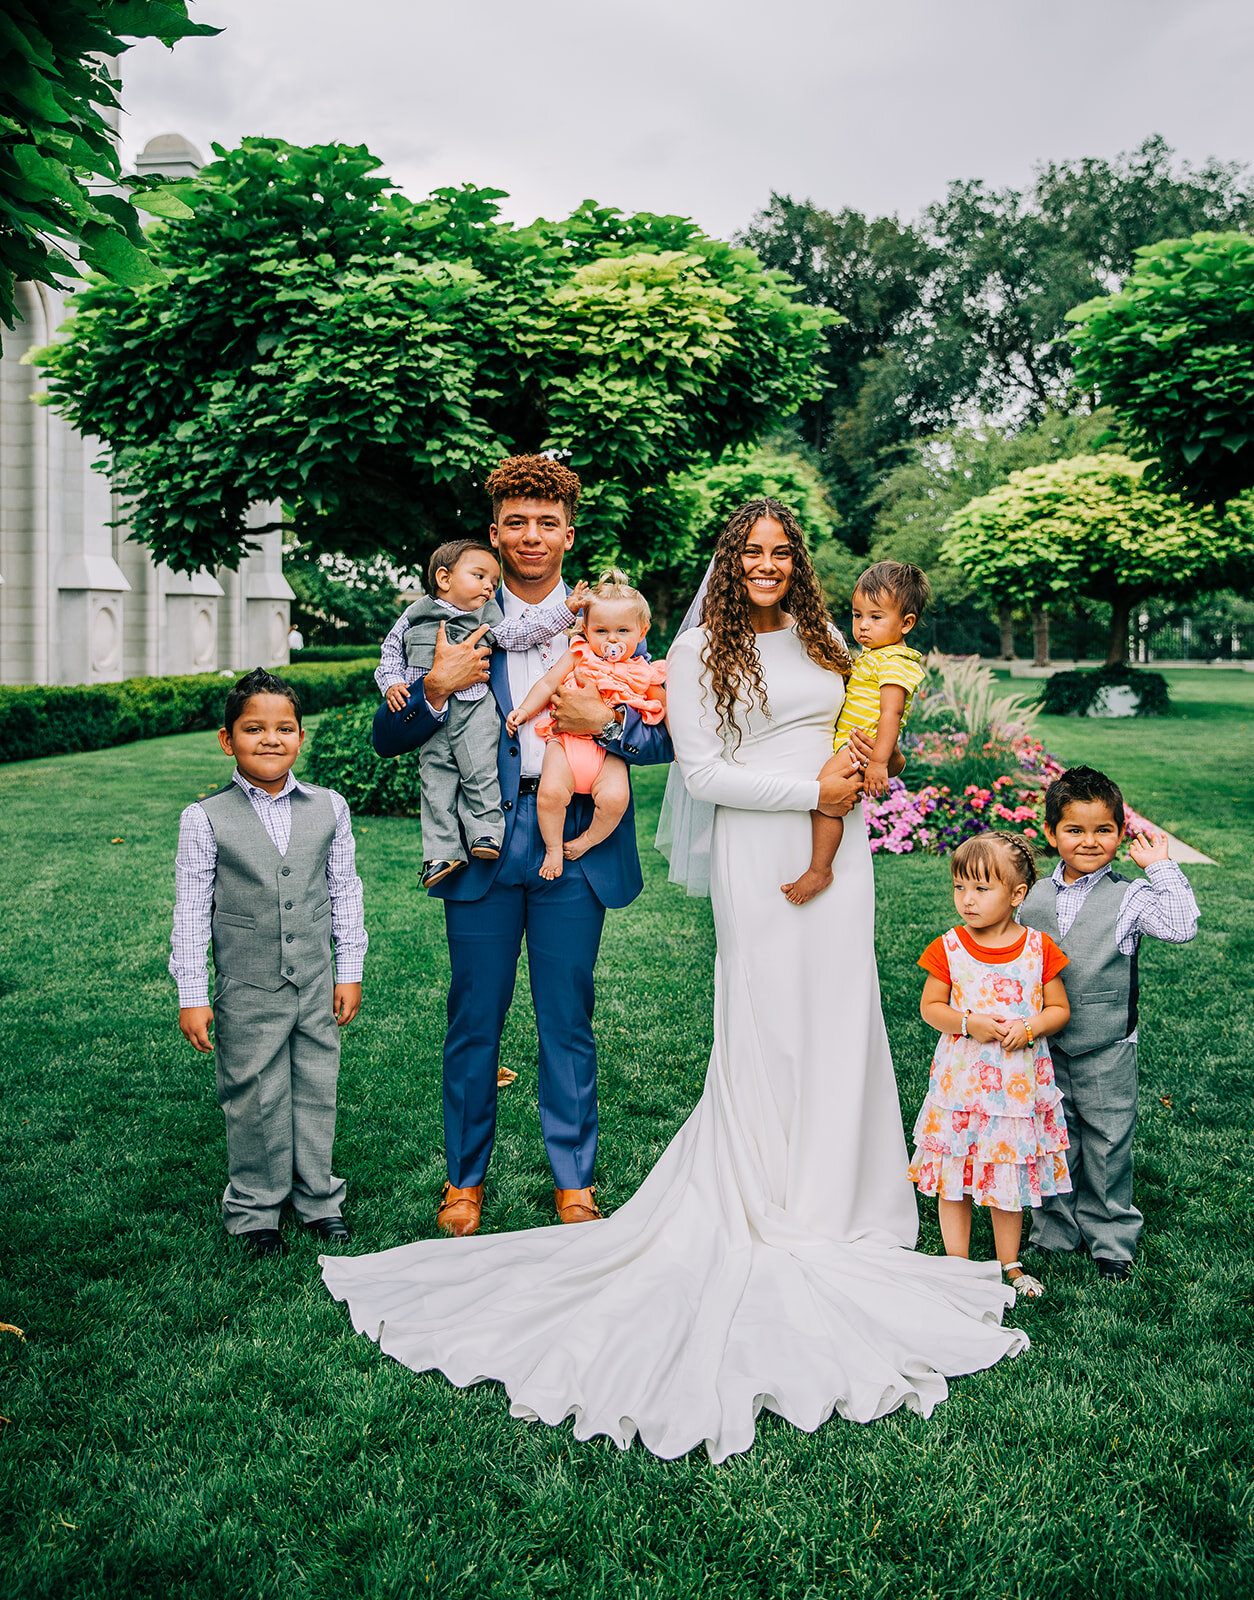  bride and groom with all the nieces and nephews flower girl ring bearer little kids boys and girls with newlyweds bridal attire inspo mormon wedding cheap wedding ideas affordable wedding photographer bella alder photography salt lake city utah wedd